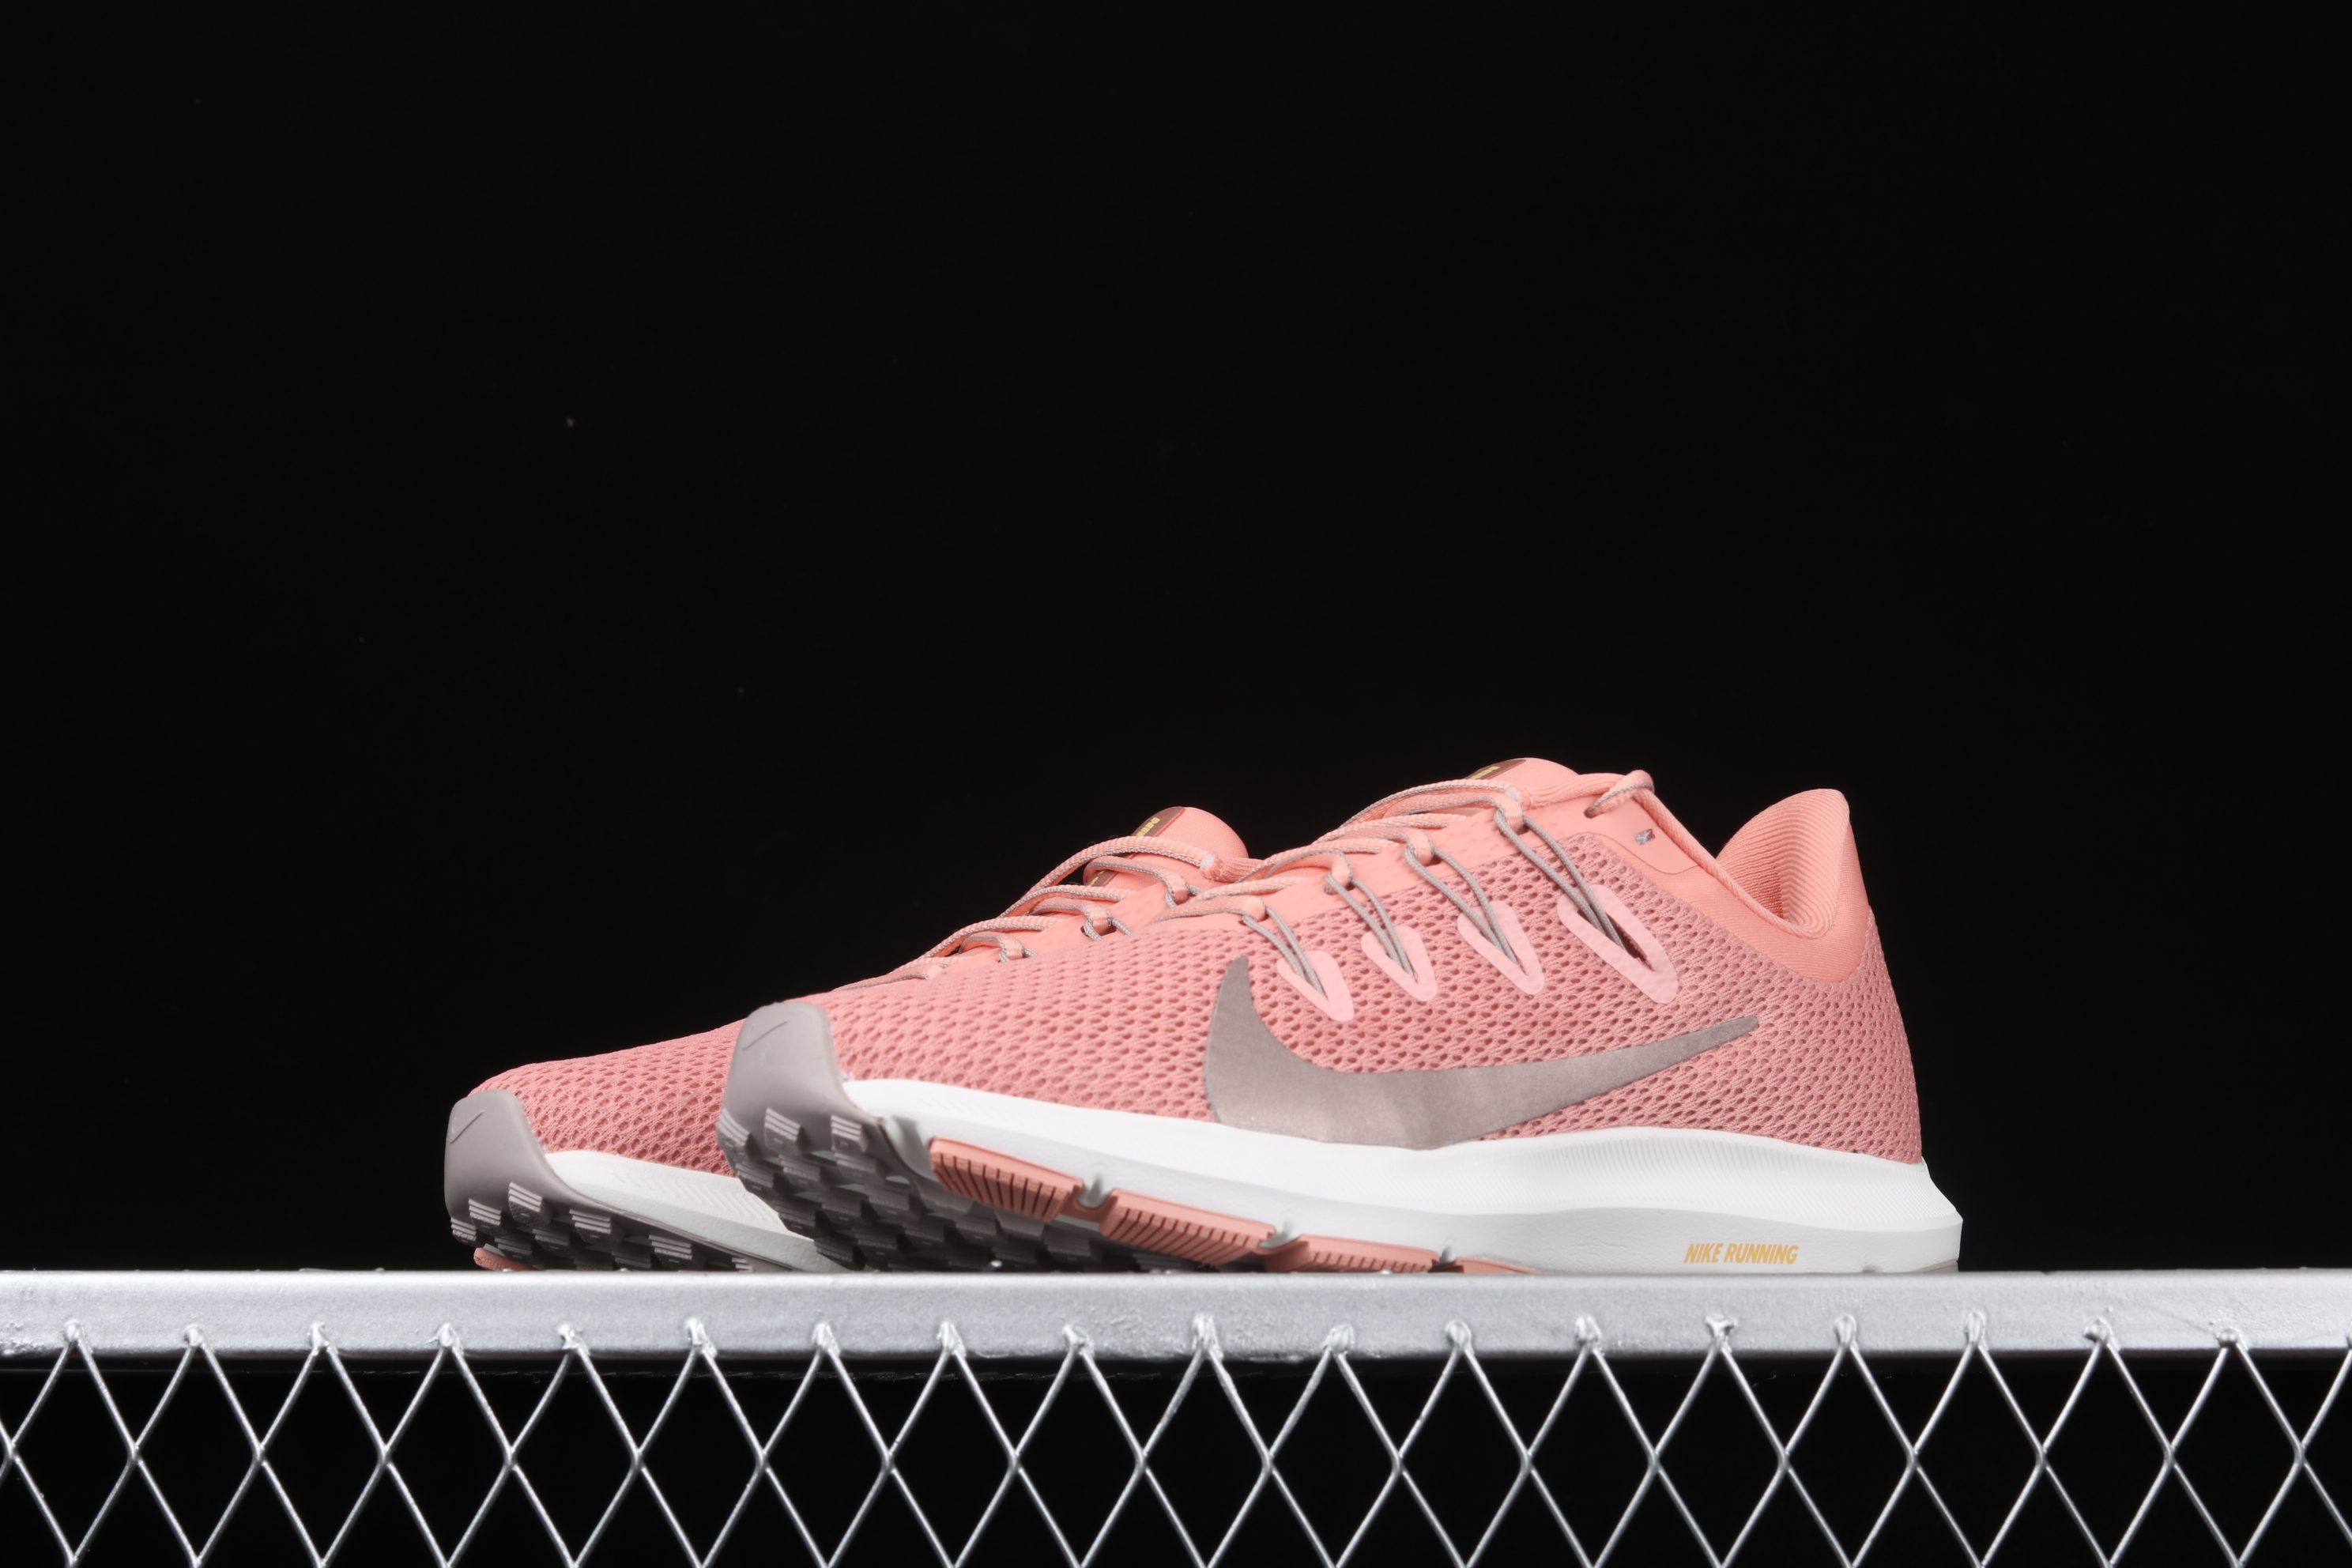 New Nike Quest 3 Pink Siver White Shoes For Women